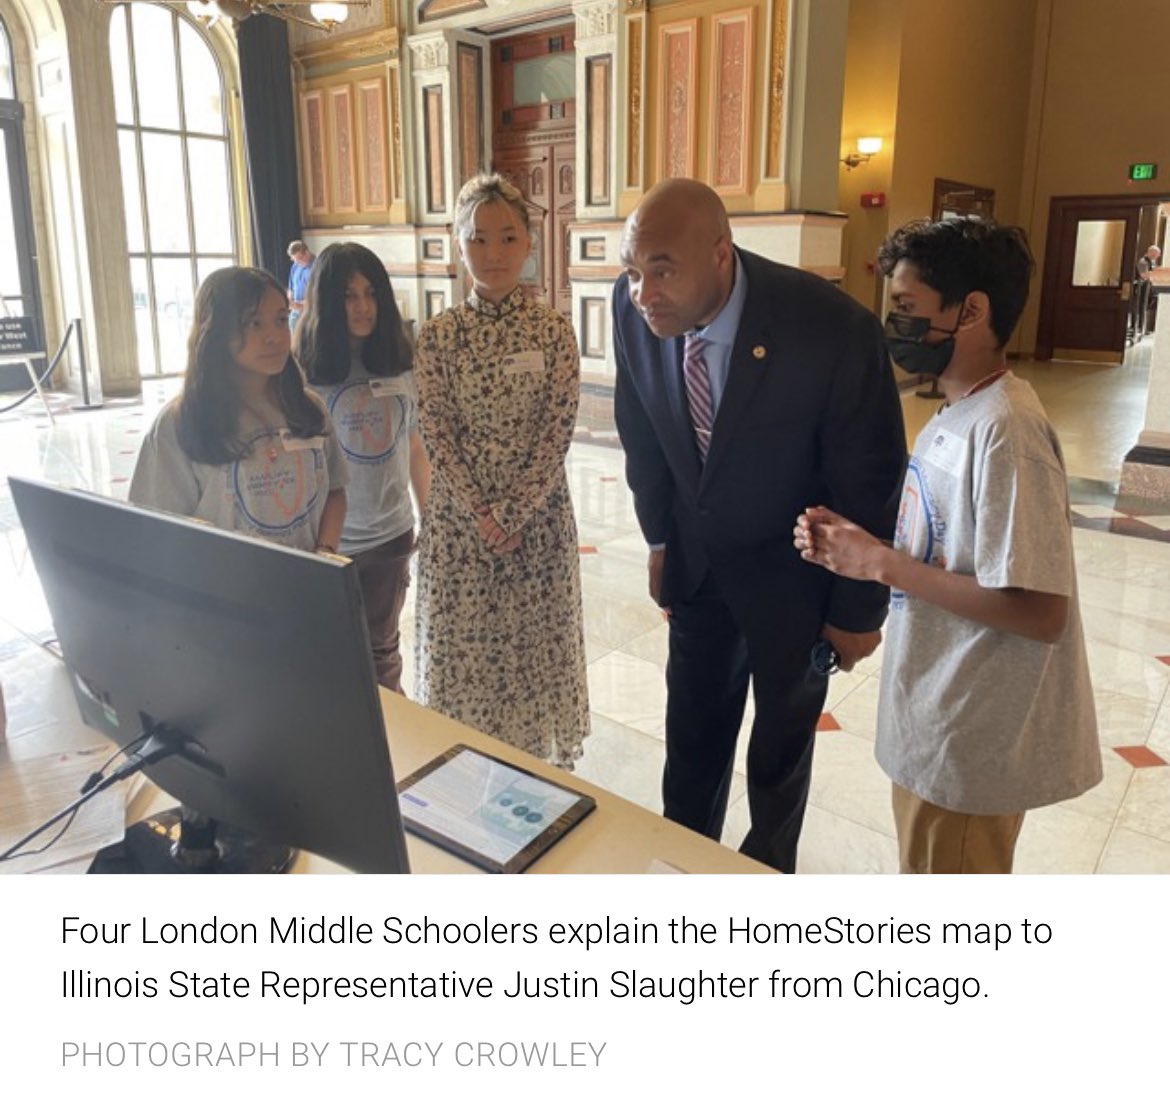 ‘HomeStories are fairly simple & short, but they’re written from the heart, conjuring deep feelings of belonging as personal…and as ancient as humanity itself.’ Migrant students in our @OutofEdenWalkCh #HomeStories program meet lawmakers in #Illinois. nationalgeographic.org/projects/out-o…